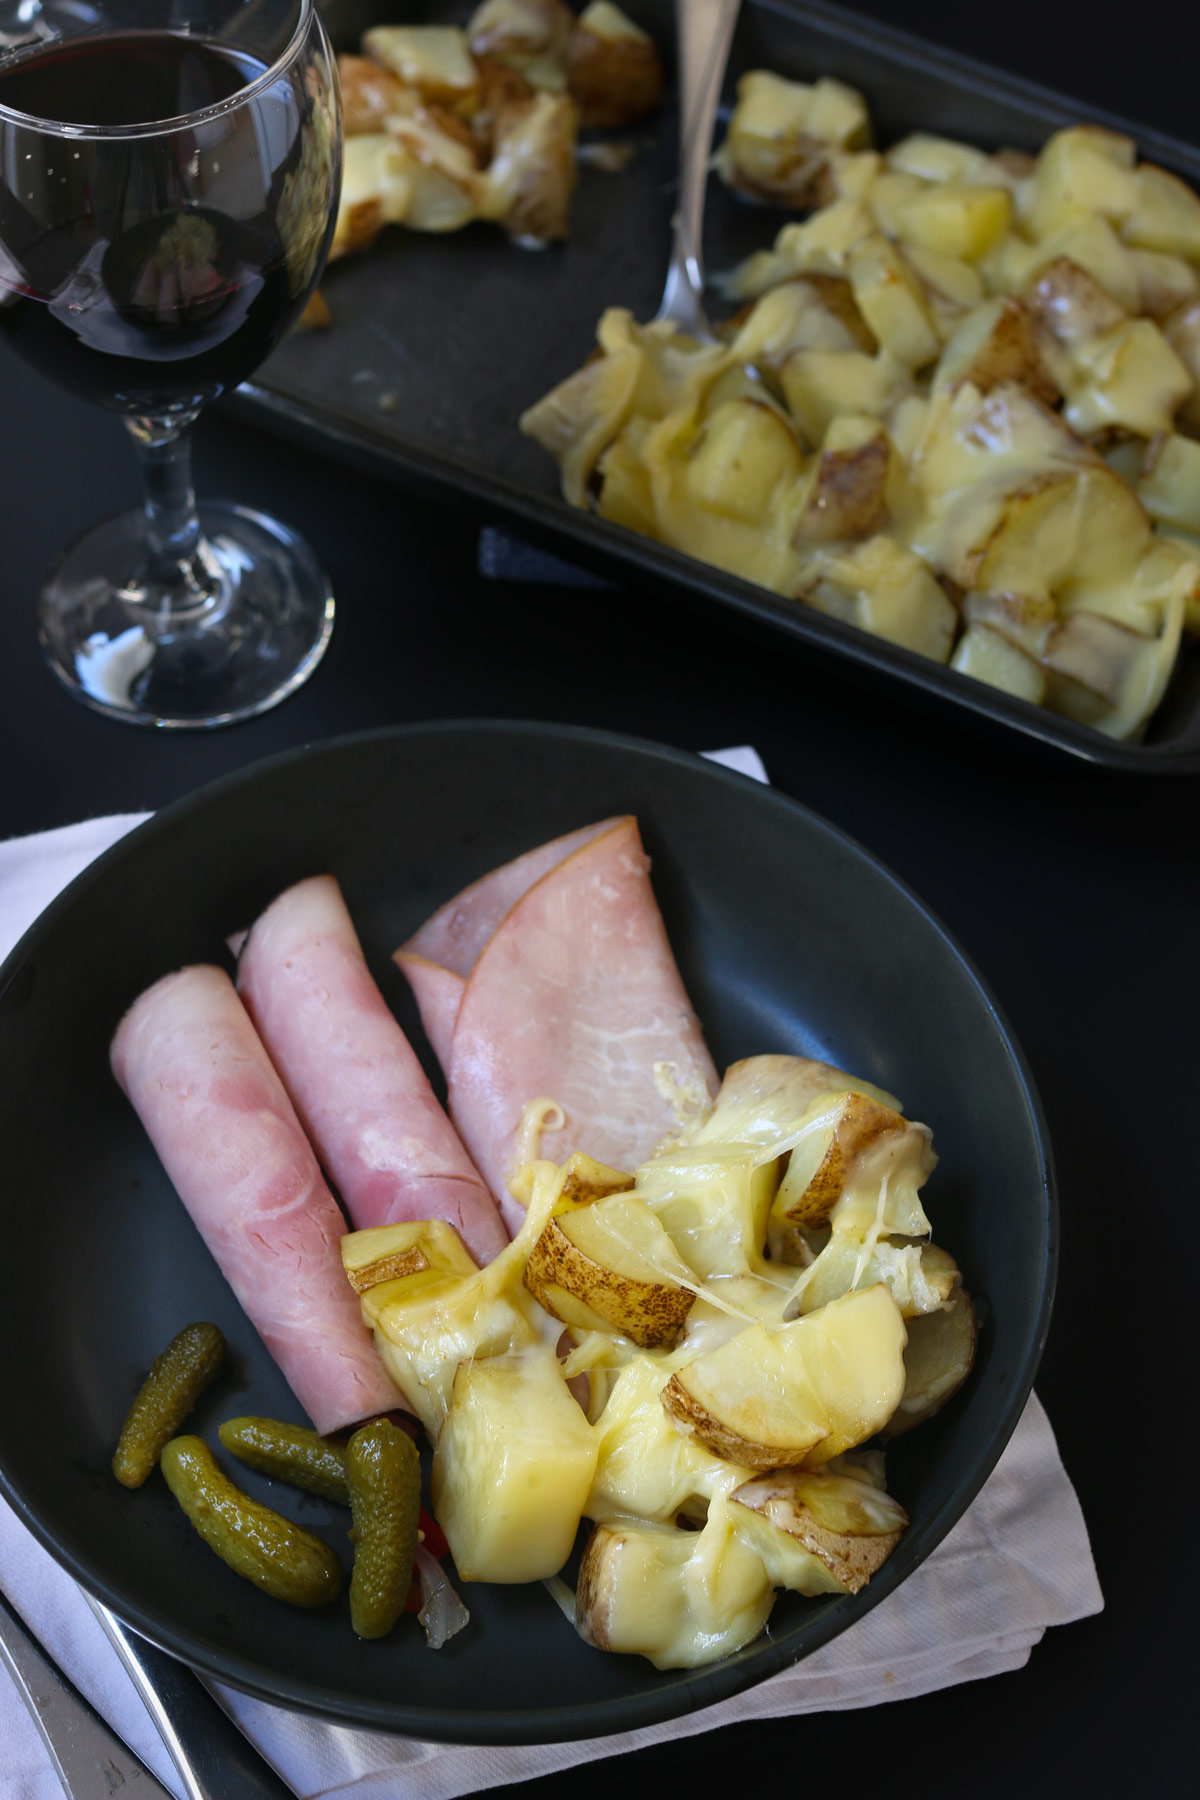 ham, raclette, potatoes, and pickles in black dish on a white napkin next to a glass of wine and the platter of raclette.